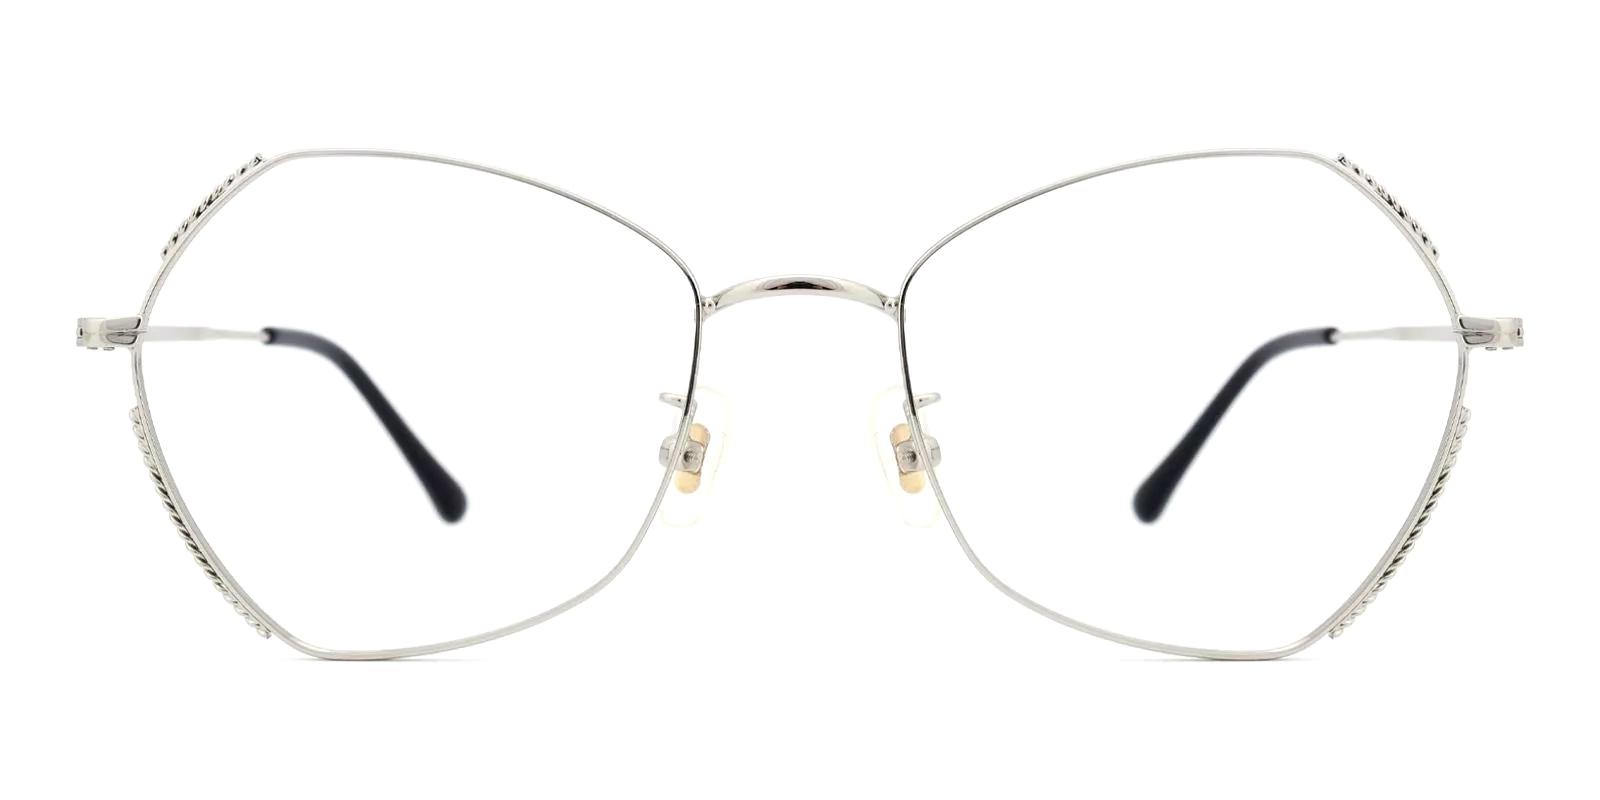 Dontic Silver Metal Eyeglasses , NosePads Frames from ABBE Glasses